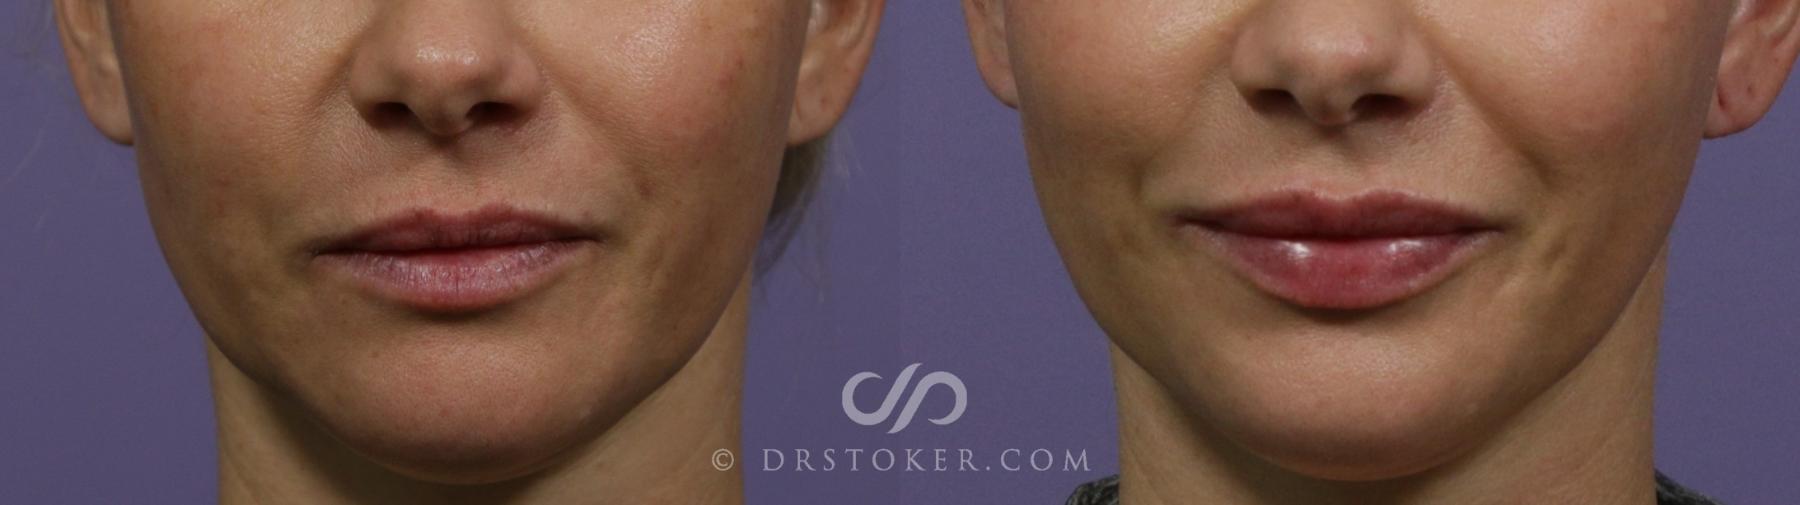 Before & After Lip Fillers/Augmentation Case 1854 Front View in Los Angeles, CA